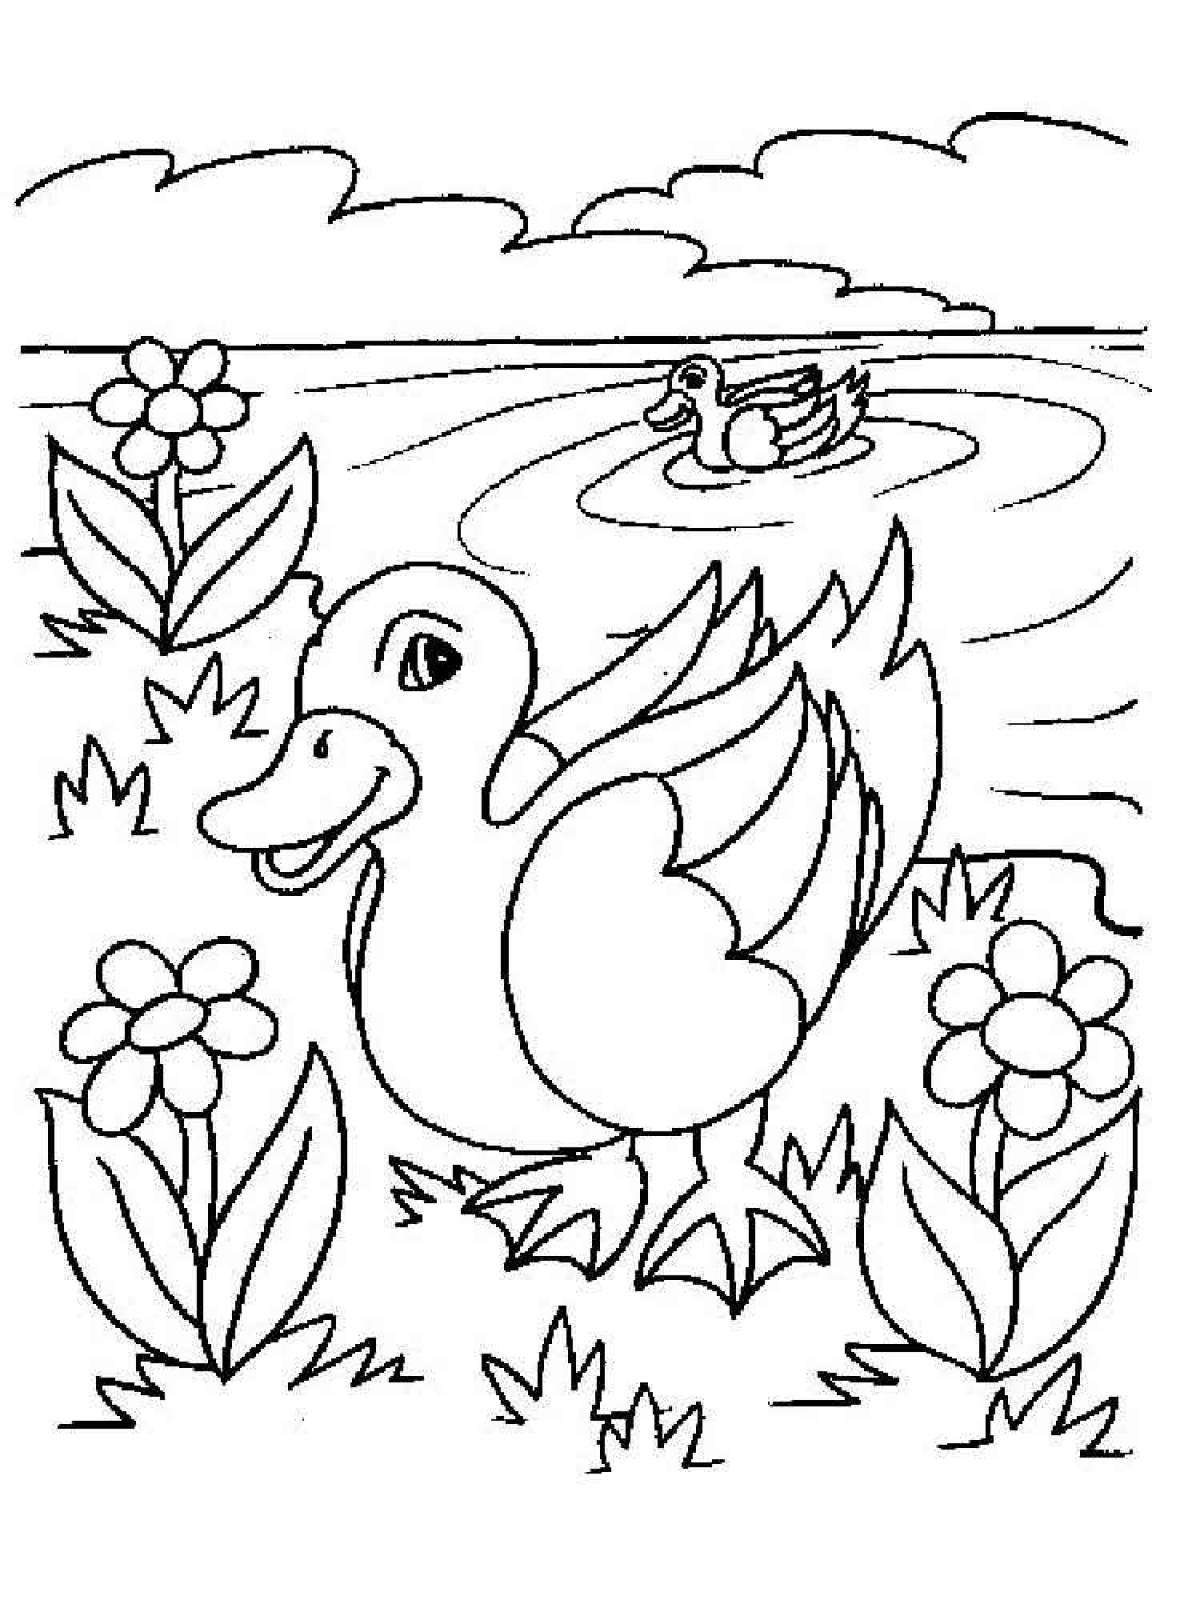 The amazing coloring book you have